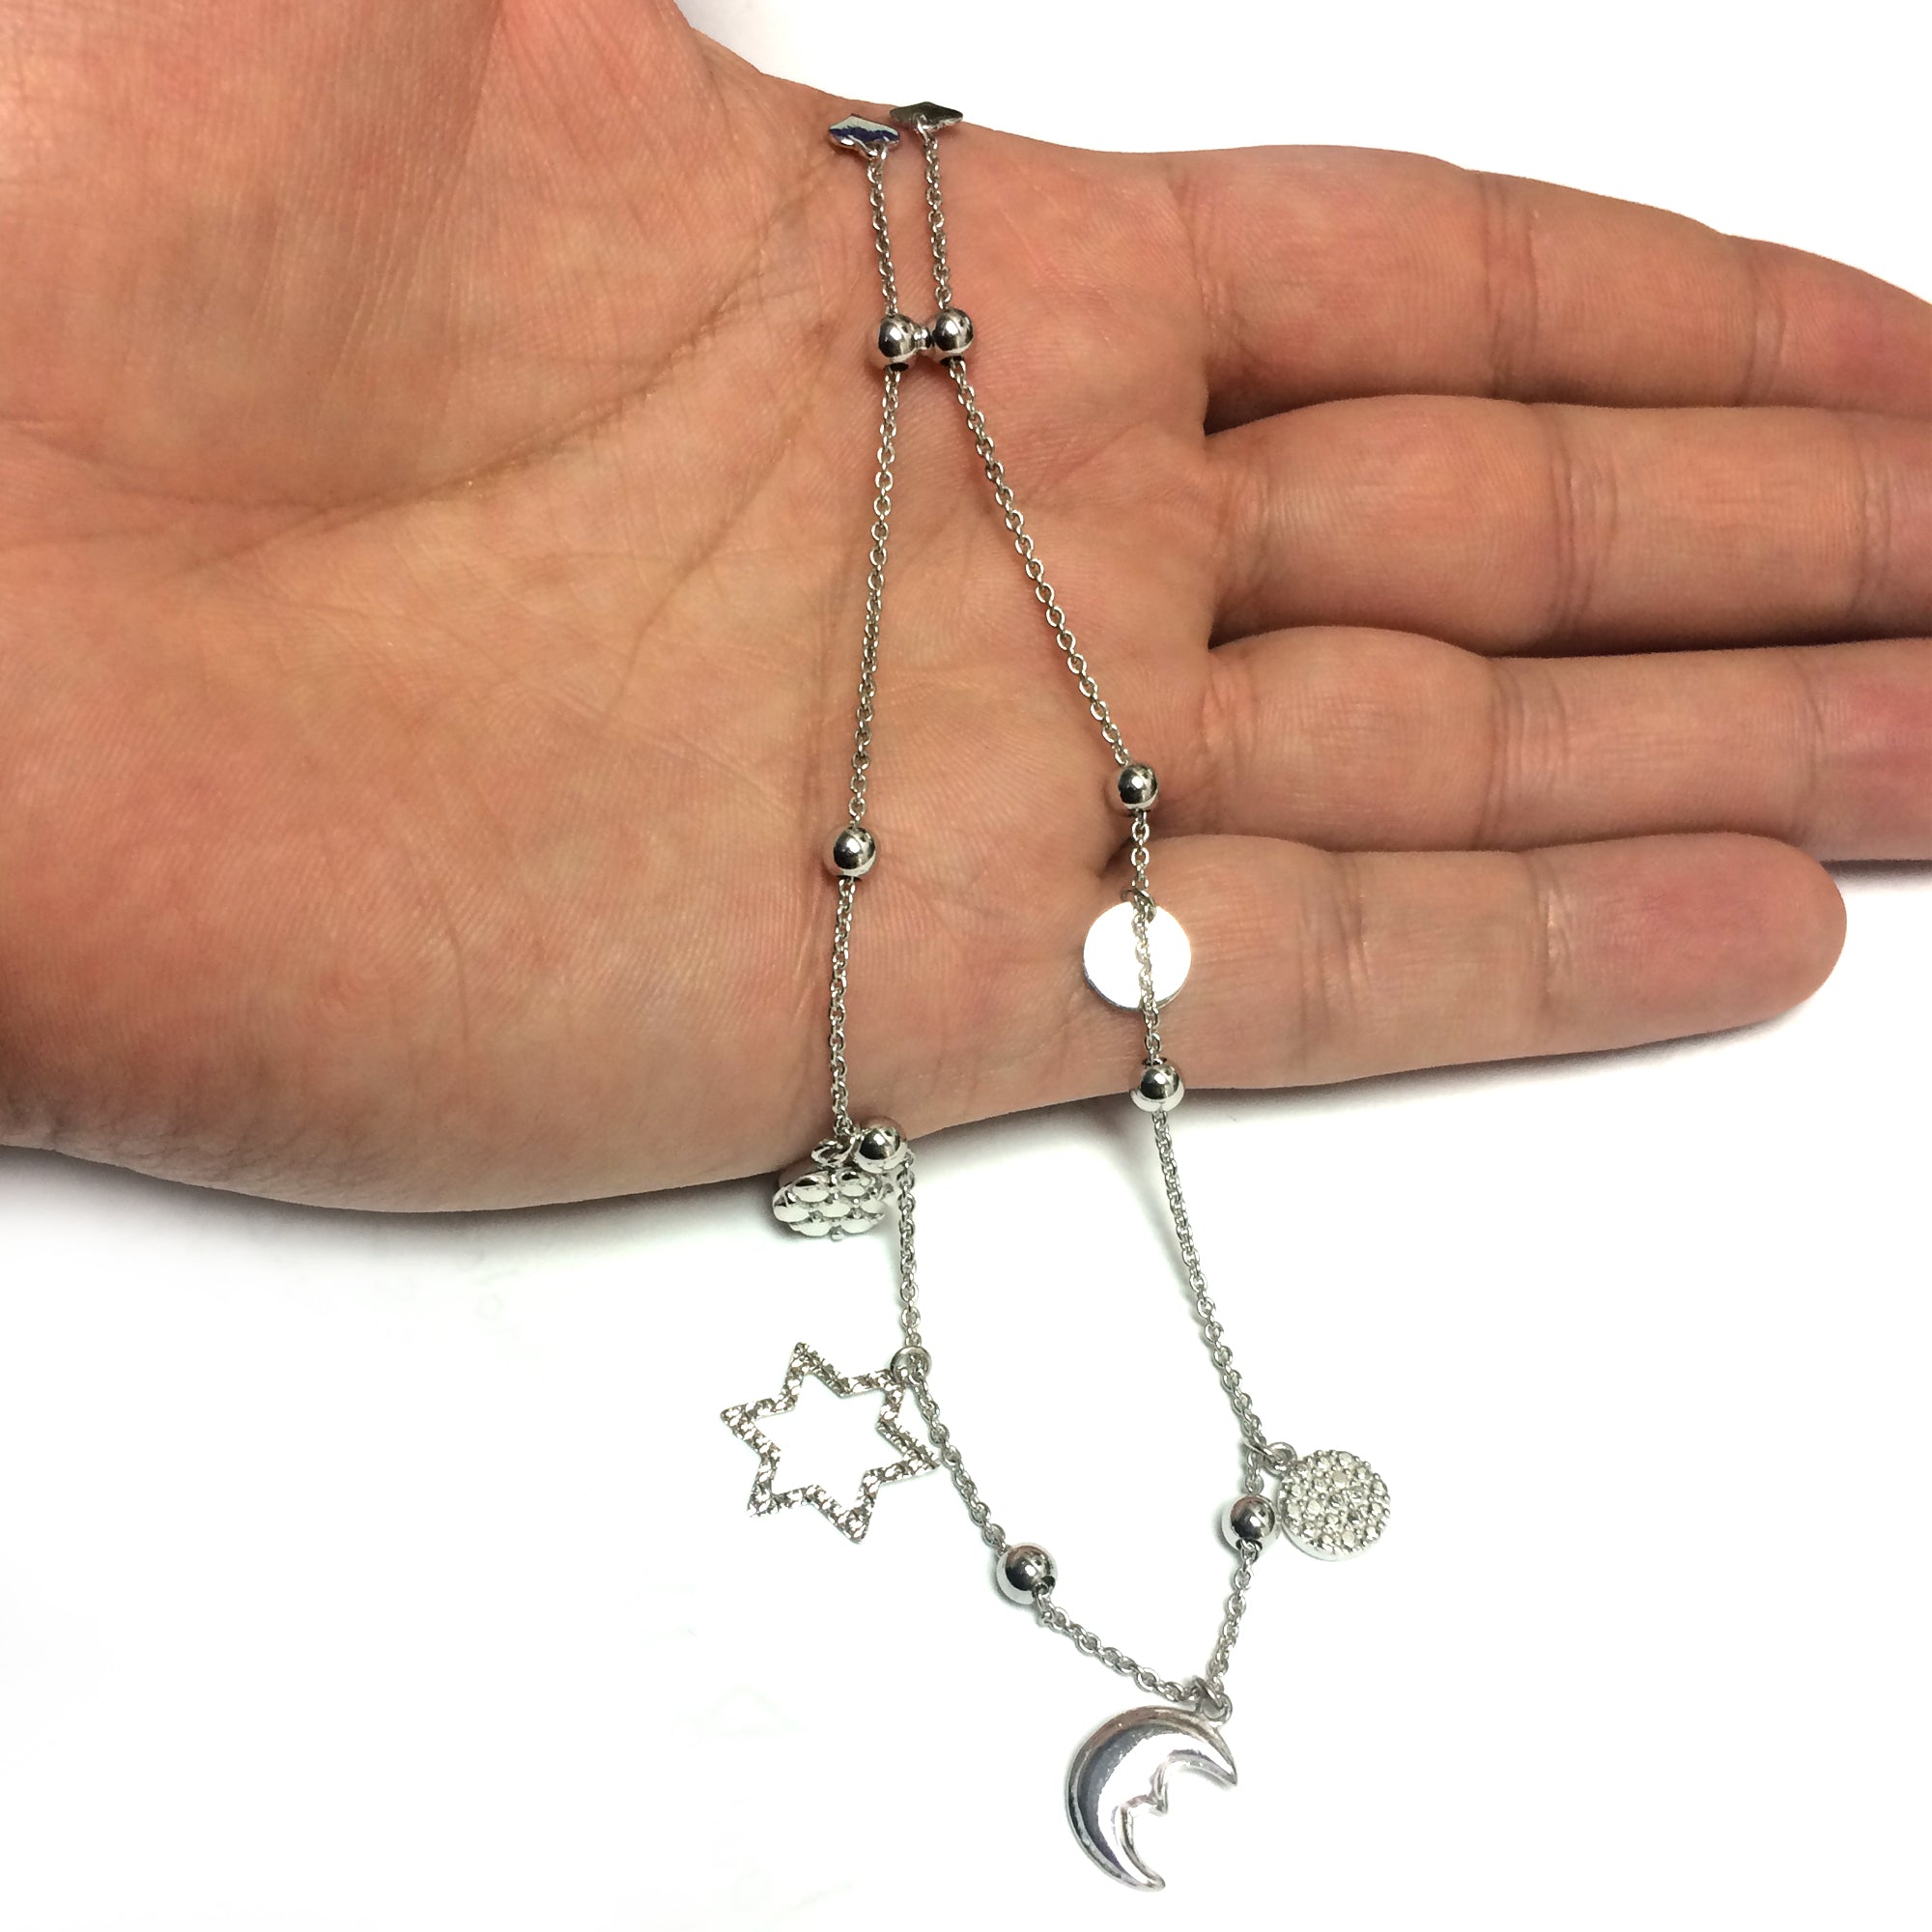 Sterling Silver Star Moon And Disc Charm Elements Adjustable Bolo Friendship Bracelet , 9.25"